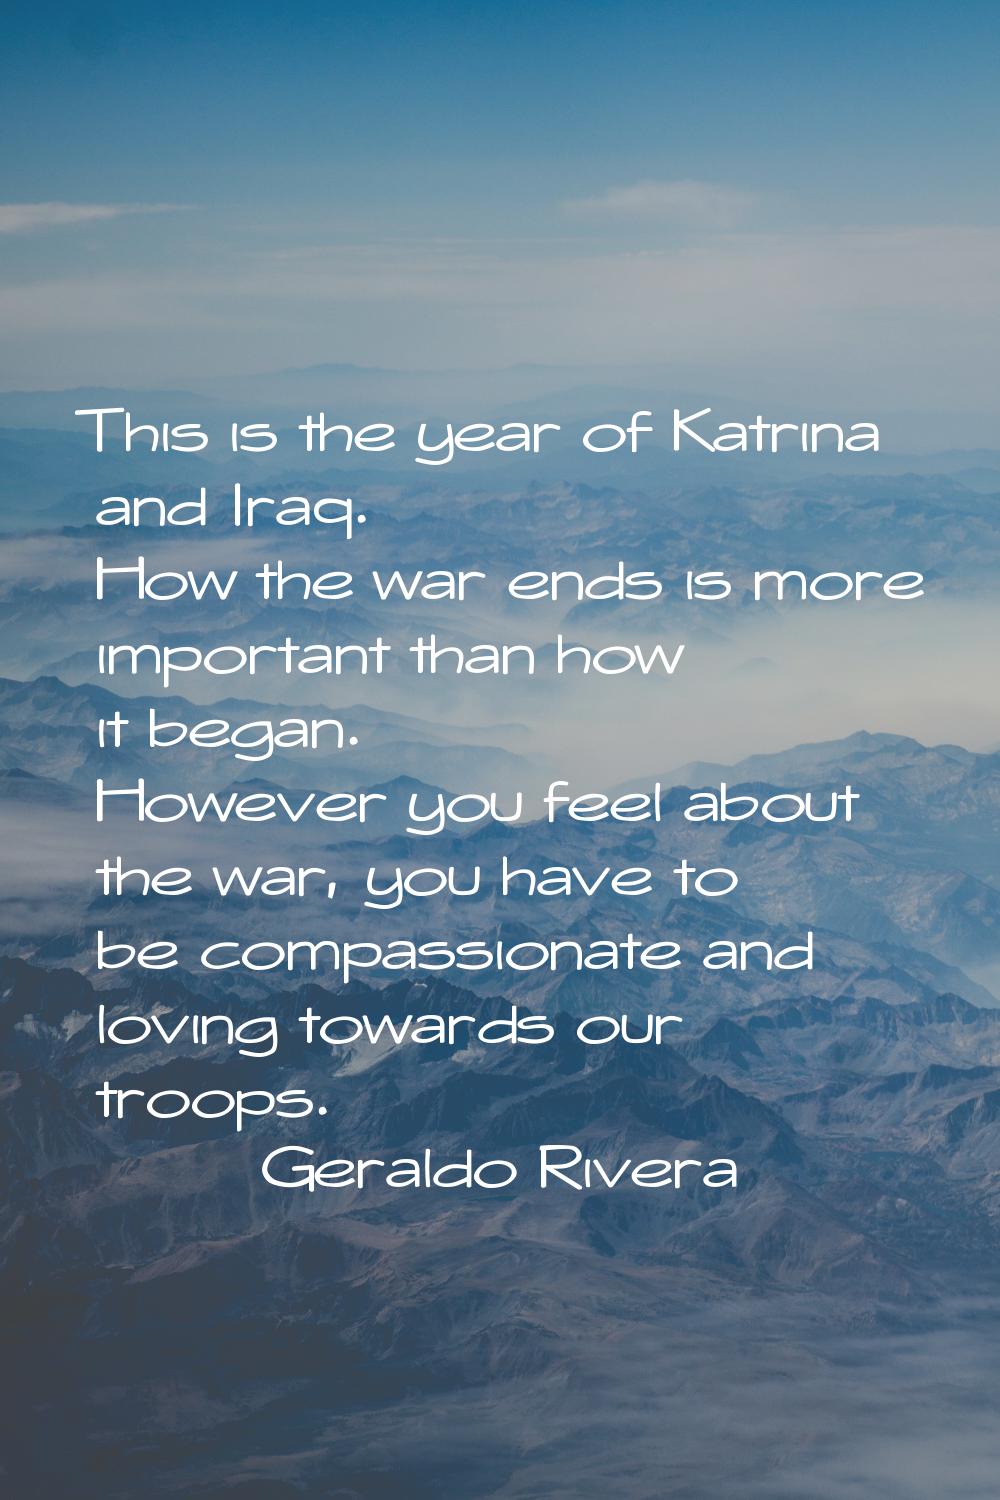 This is the year of Katrina and Iraq. How the war ends is more important than how it began. However